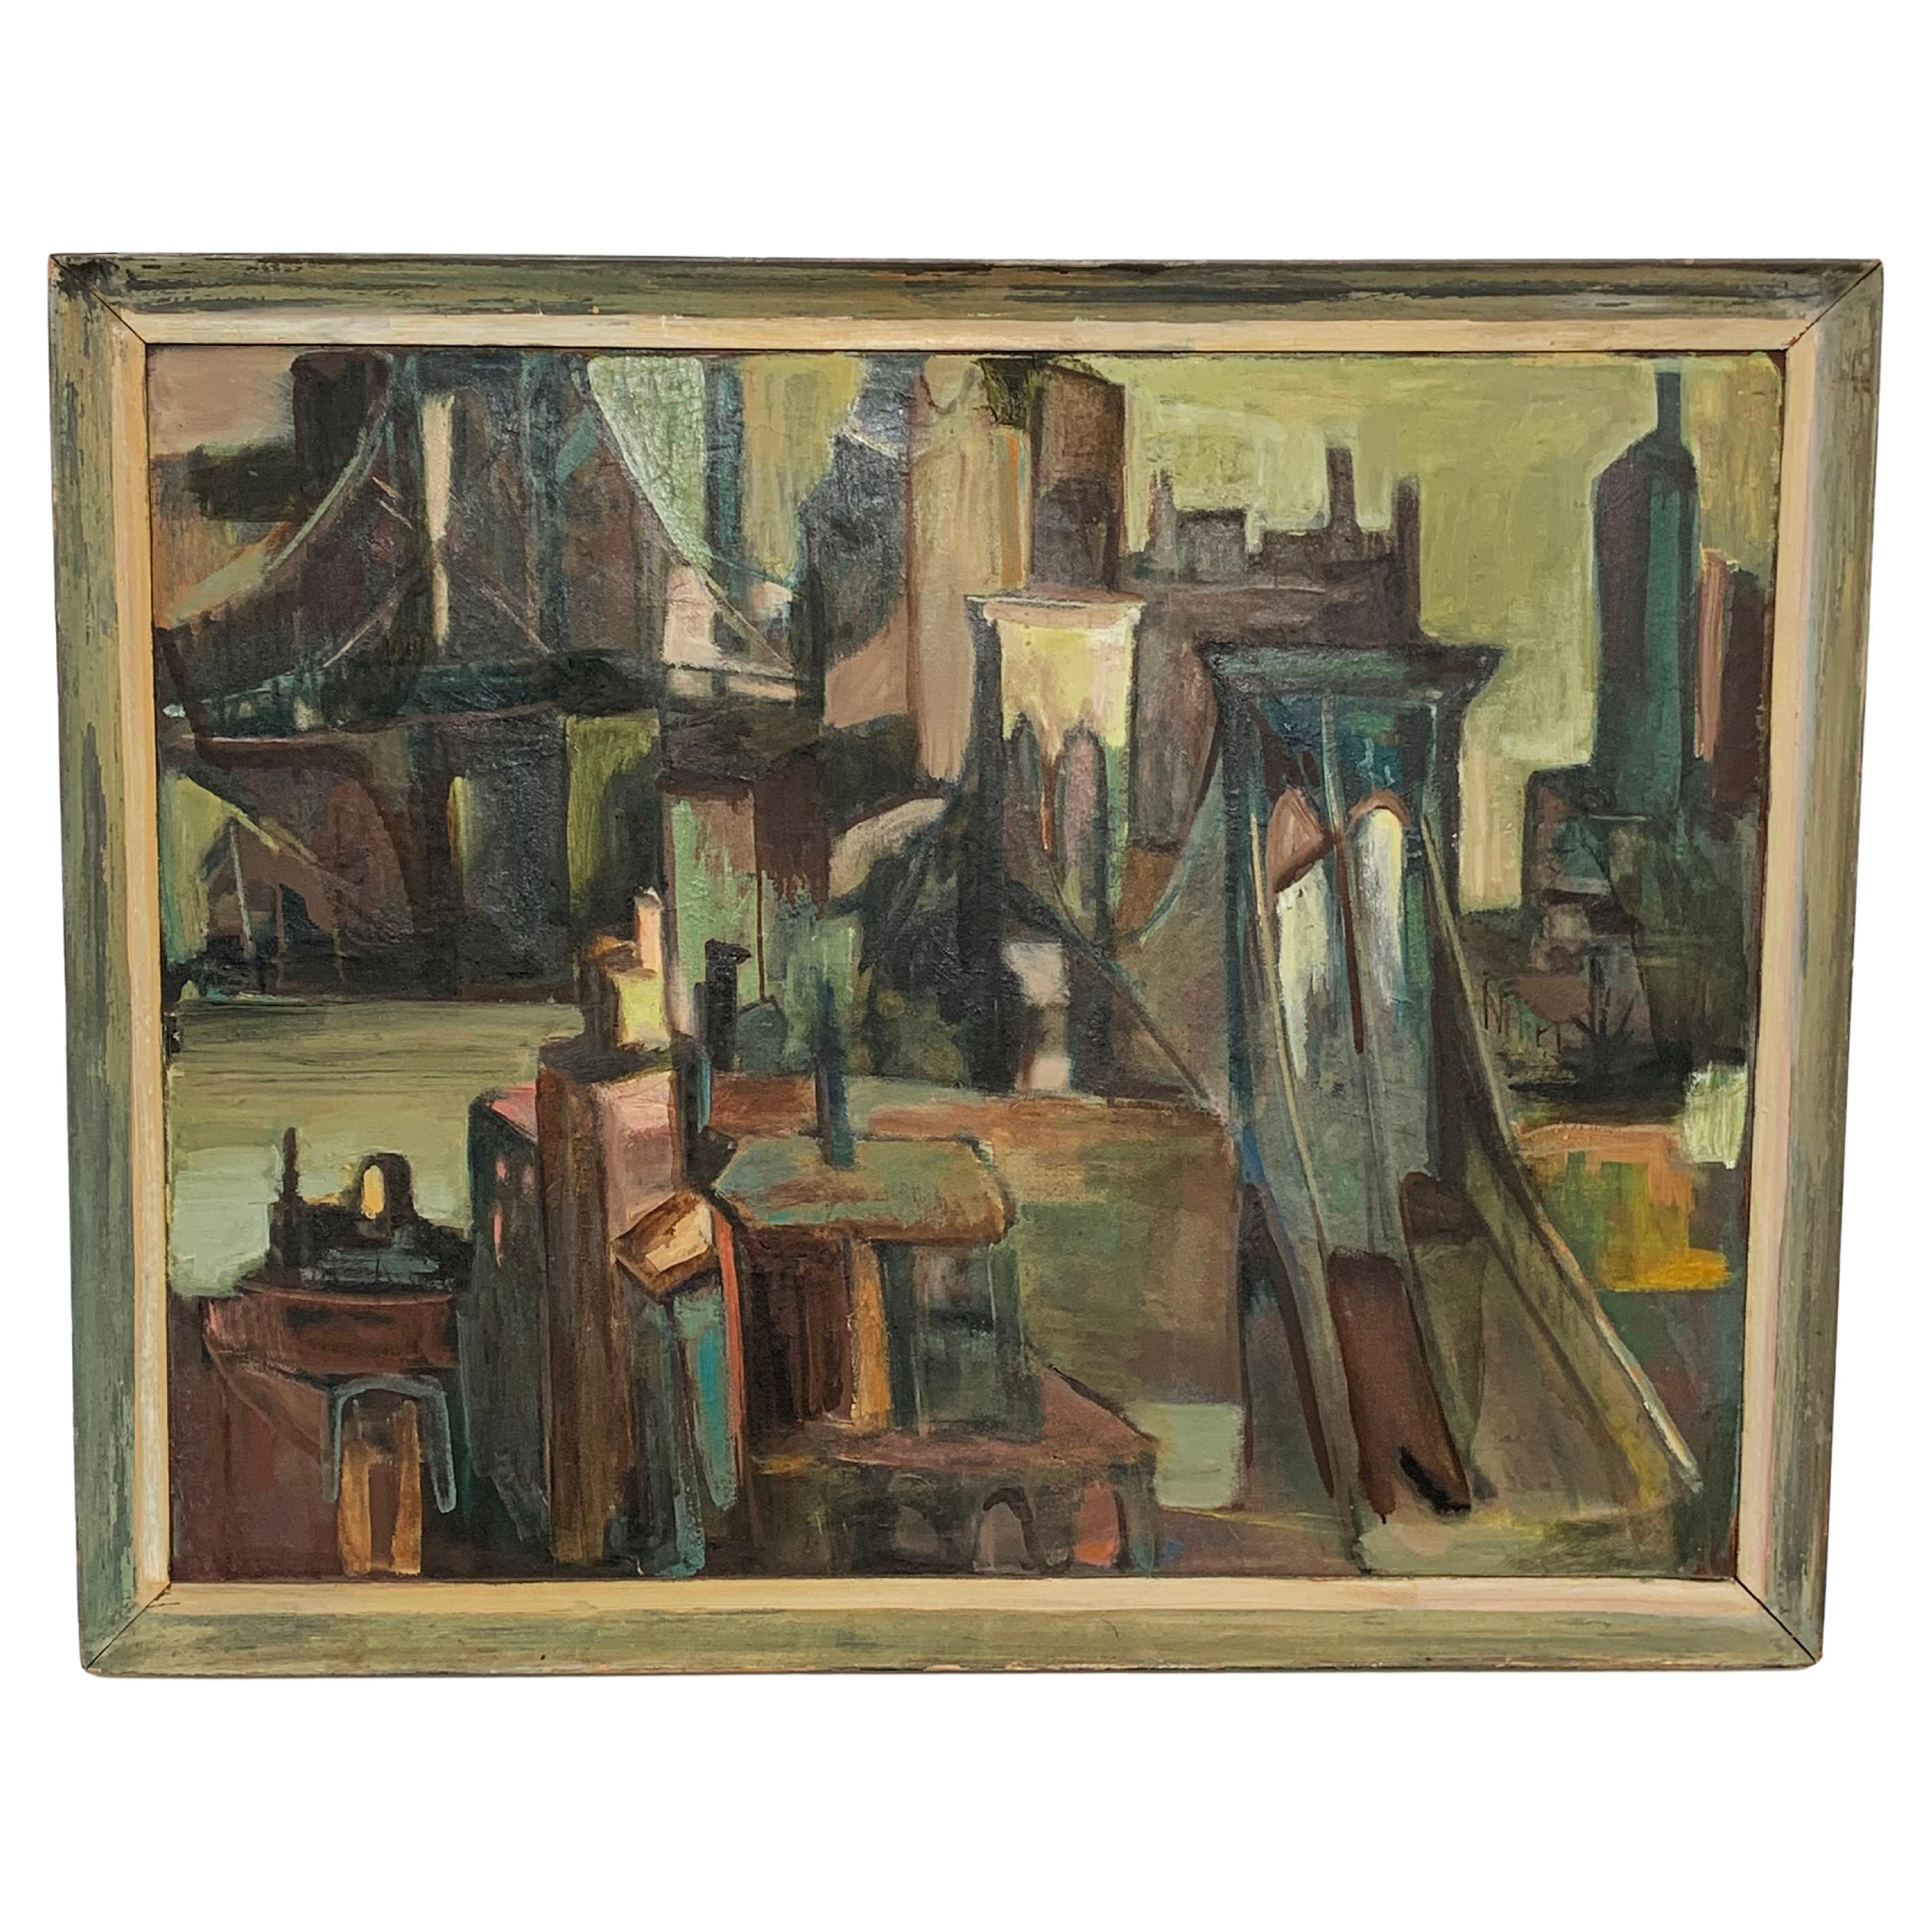 Modernist New York Landscape Painting Signed B. Simmons, Dated 1957